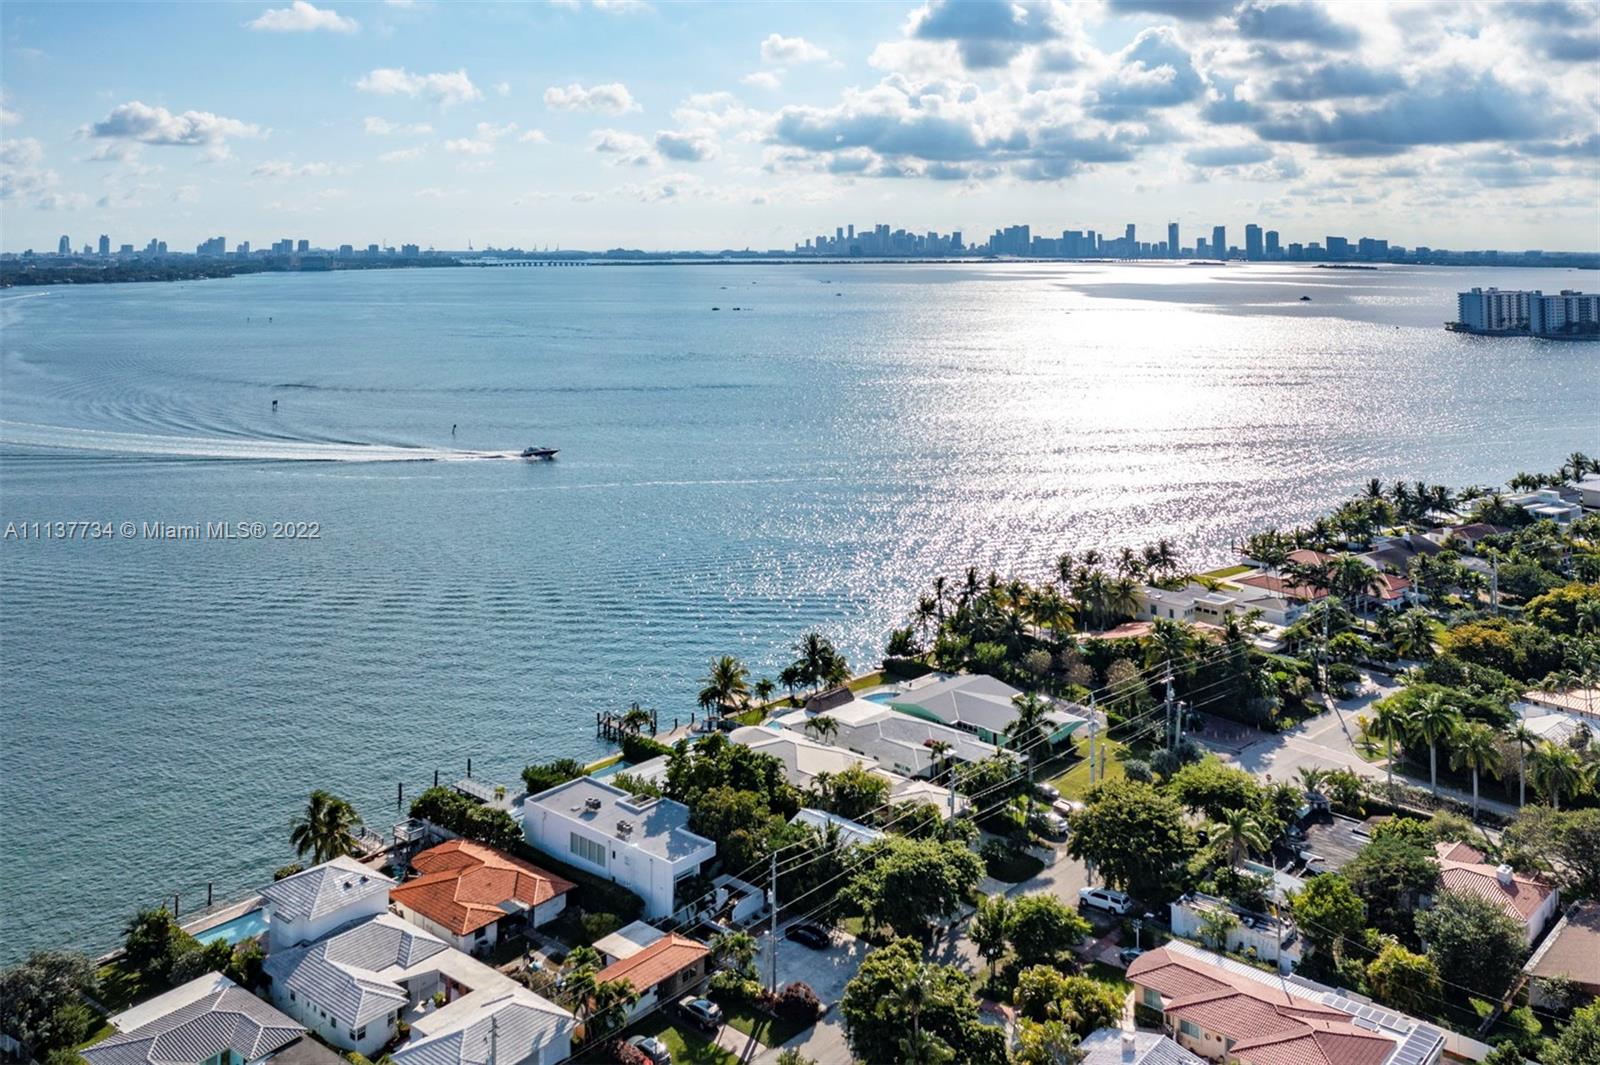 This classic Normandy Isles home offers spectacular southern panoramic views of Biscayne Bay, Miami Beach, and Downtown Miami, at an angle that allows you to take in sunrises and sunsets in equal delight - a truly special perspective for a Miami Beach property. Built in 1950, the three-bedroom, two-bath house features midcentury modern details such as a magnificent bow-windowed living space, an iconic kidney bean-shaped swimming pool and a large dock. The 2,709 square foot house also offers a two-car garage and a recently updated kitchen, and sits on an 8,770 square foot lot, with room to expand or build anew.